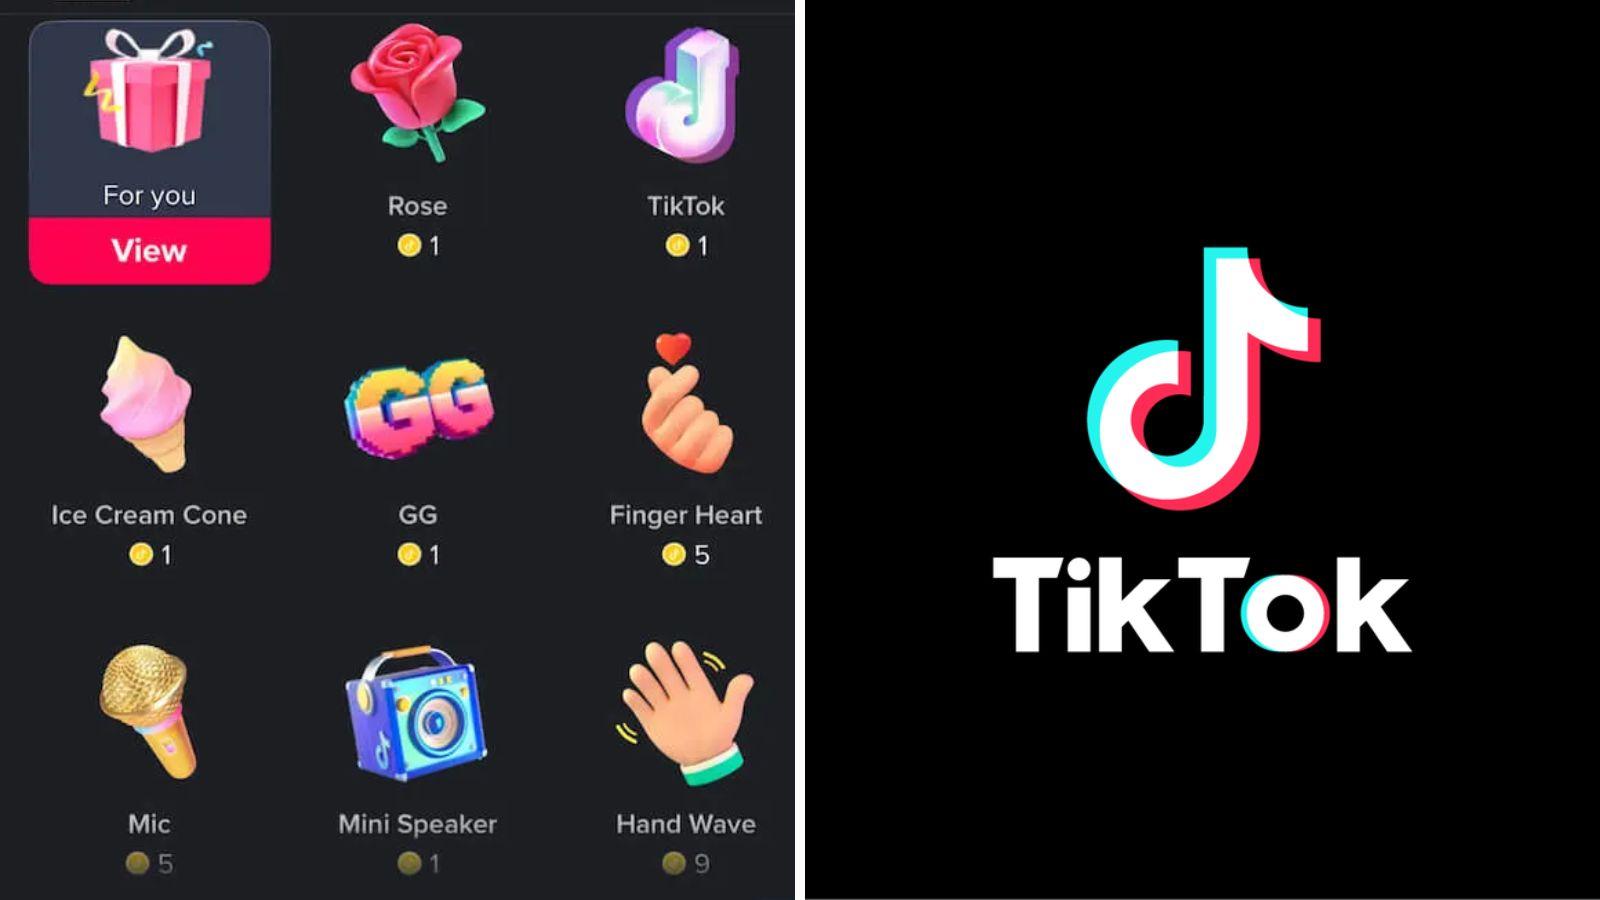 What is the most expensive TikTok gift? Dexerto